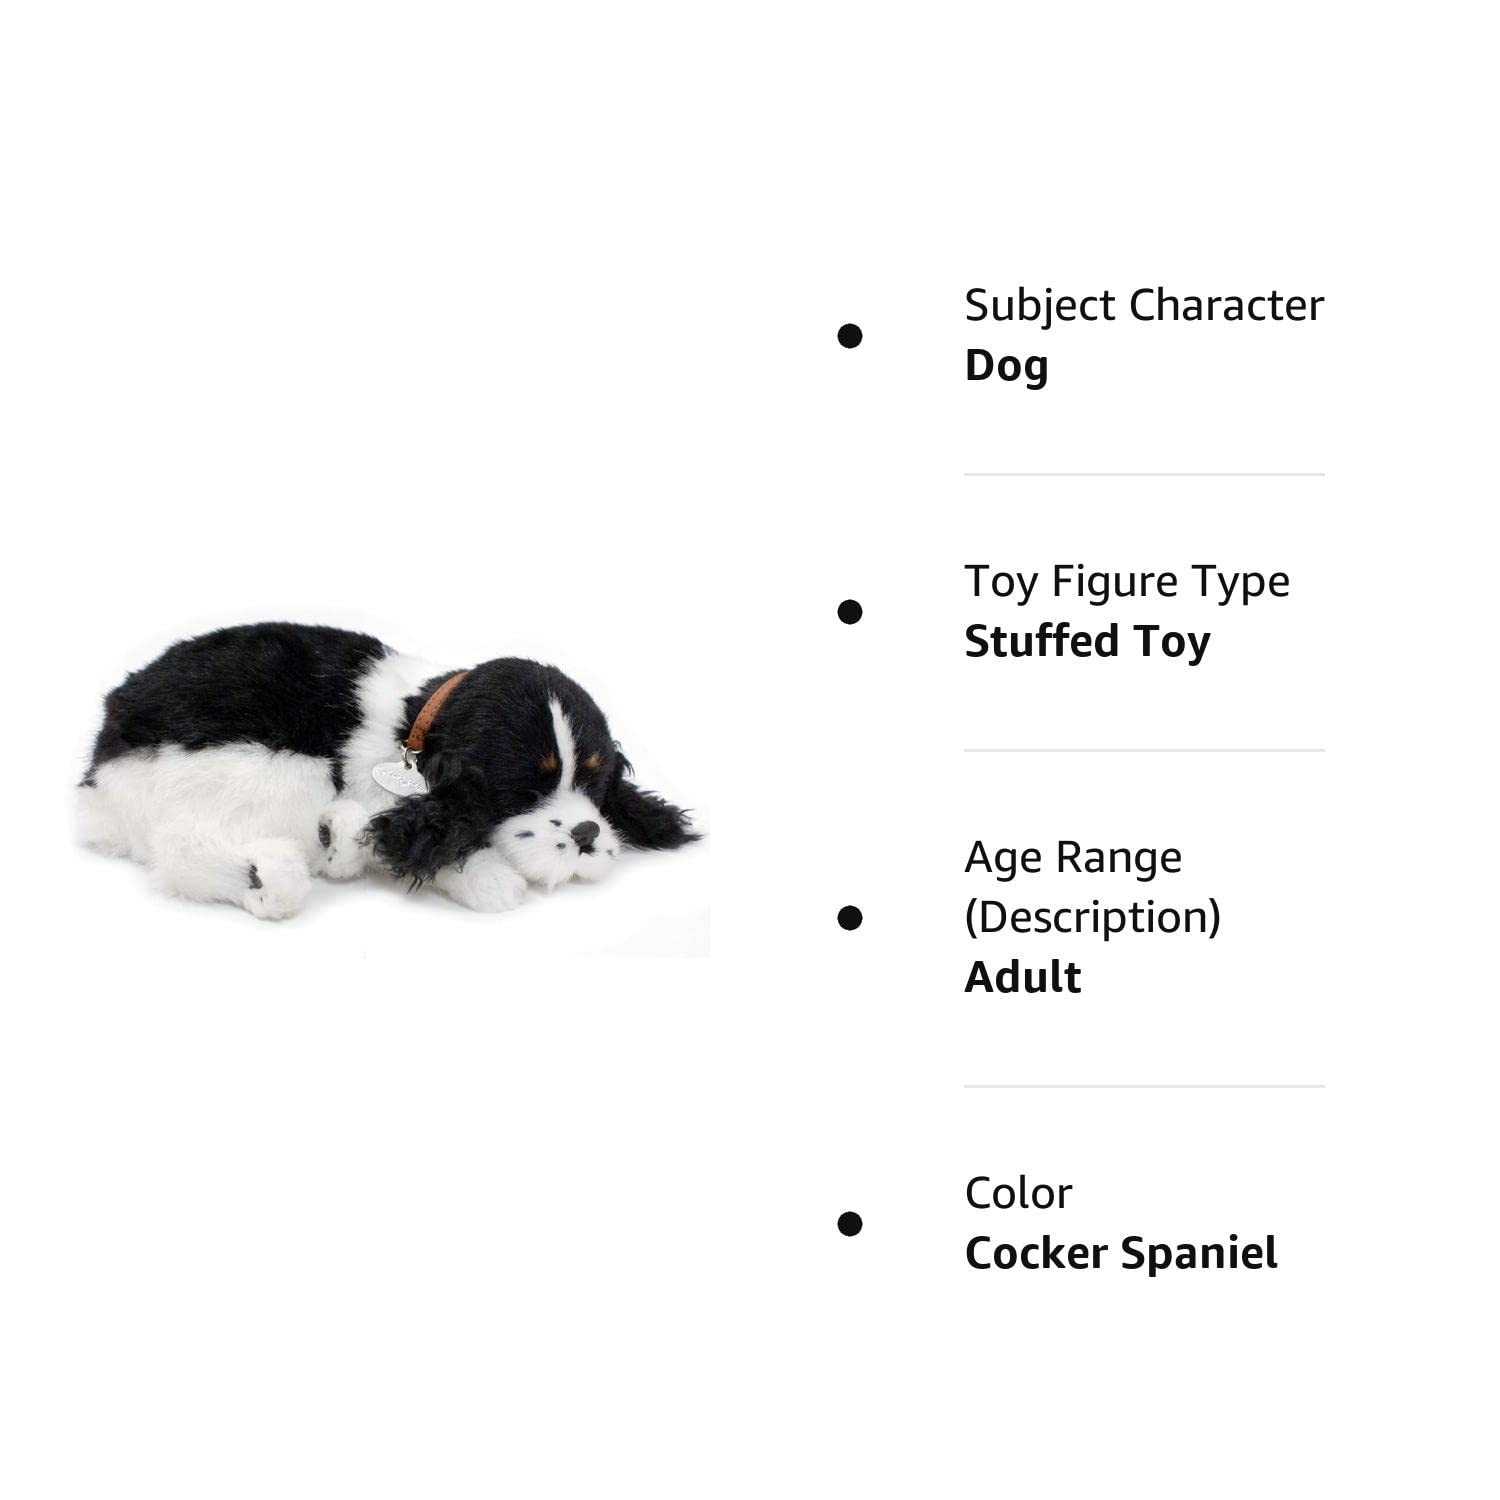 Perfect Petzzz - Original Petzzz Cocker Spaniel, Realistic Lifelike Stuffed Interactive Pet Toy, Companion Pet Dog with 100% Handcrafted Synthetic Fur